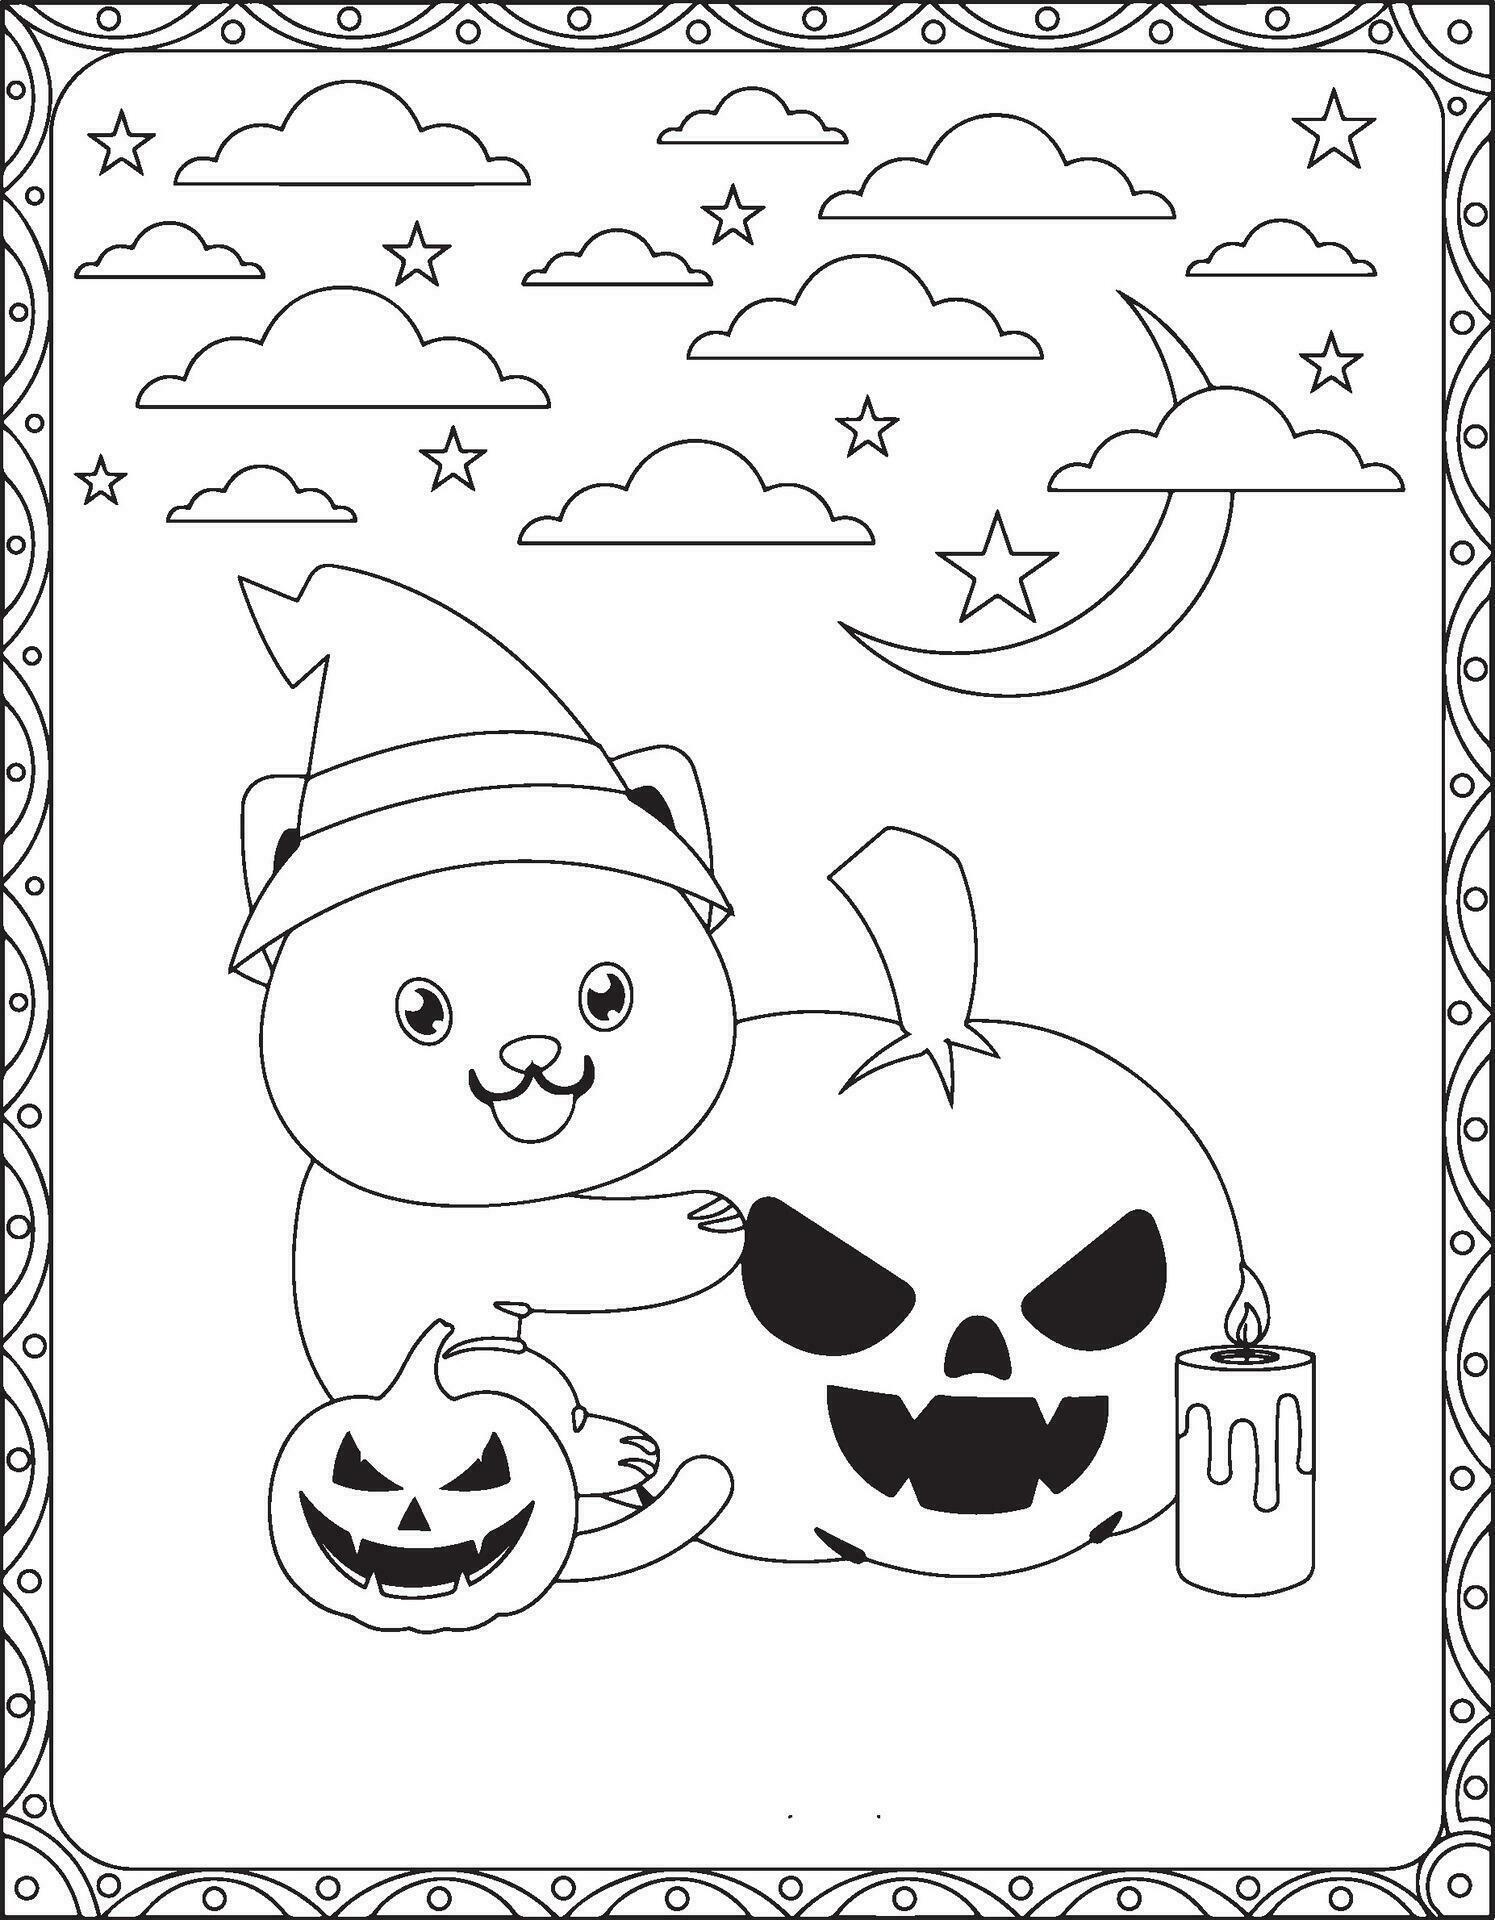 halloween-coloring-pages-halloween-cat-coloring-pages-for-kids-halloween-illustration